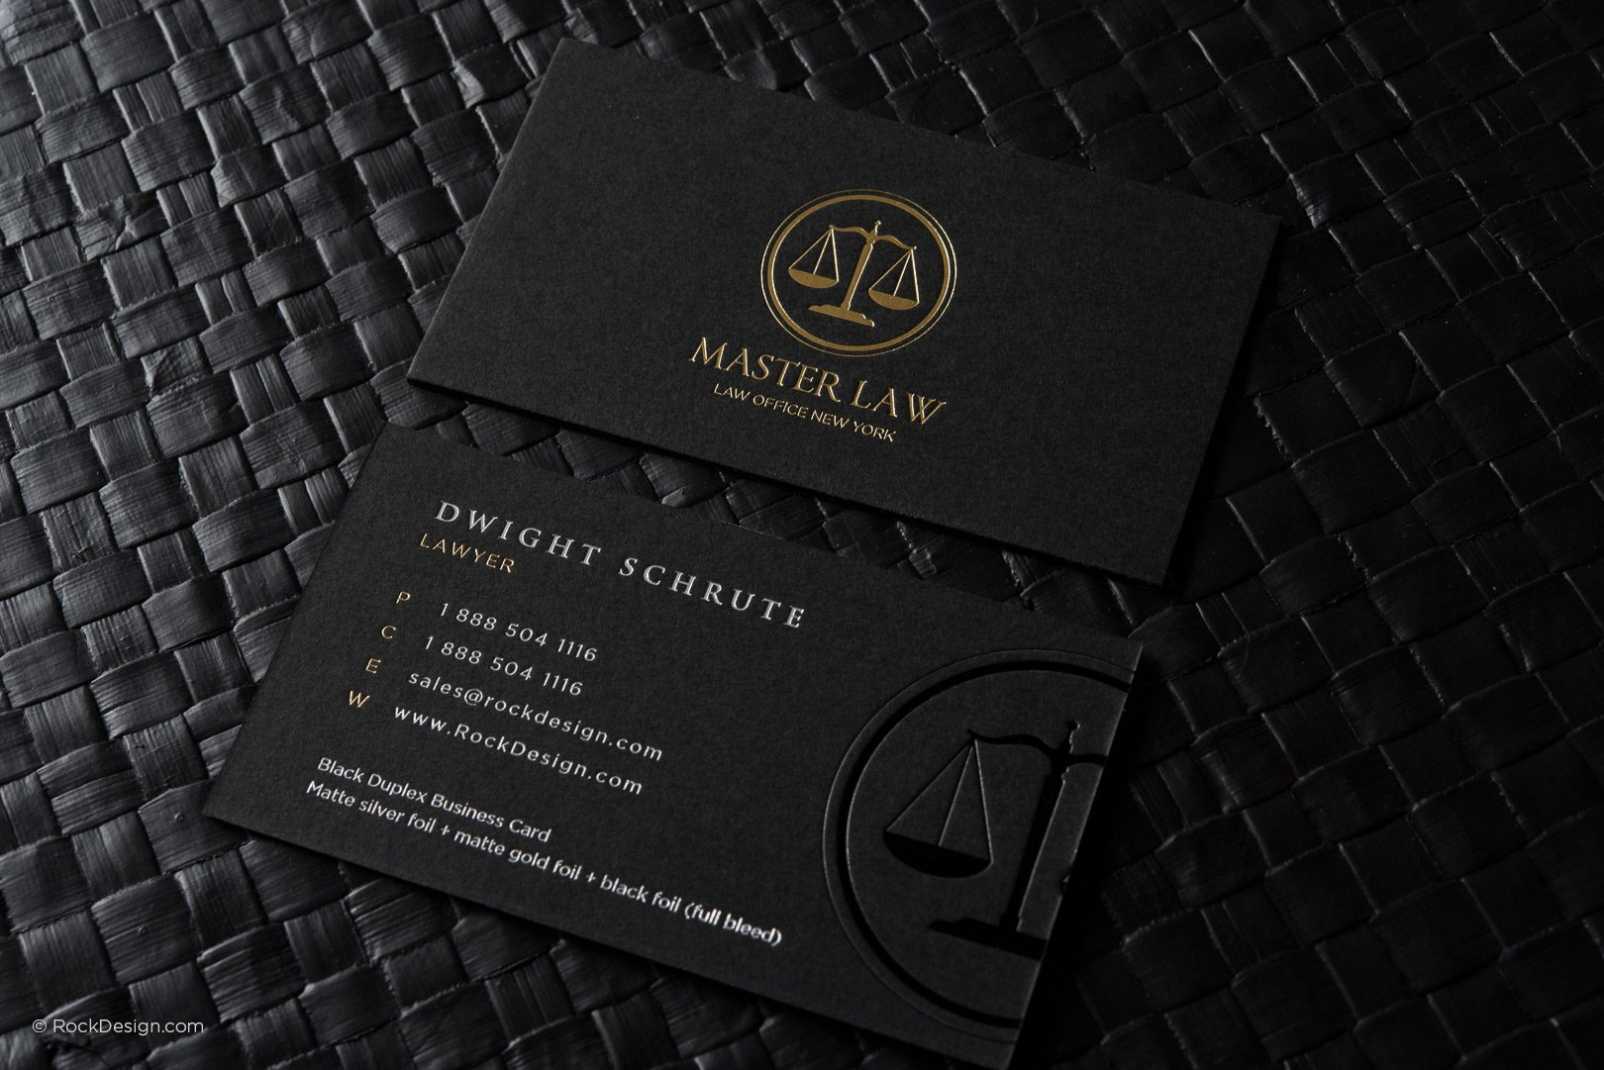 Free Lawyer Business Card Template | Rockdesign in Legal Business Cards Templates Free